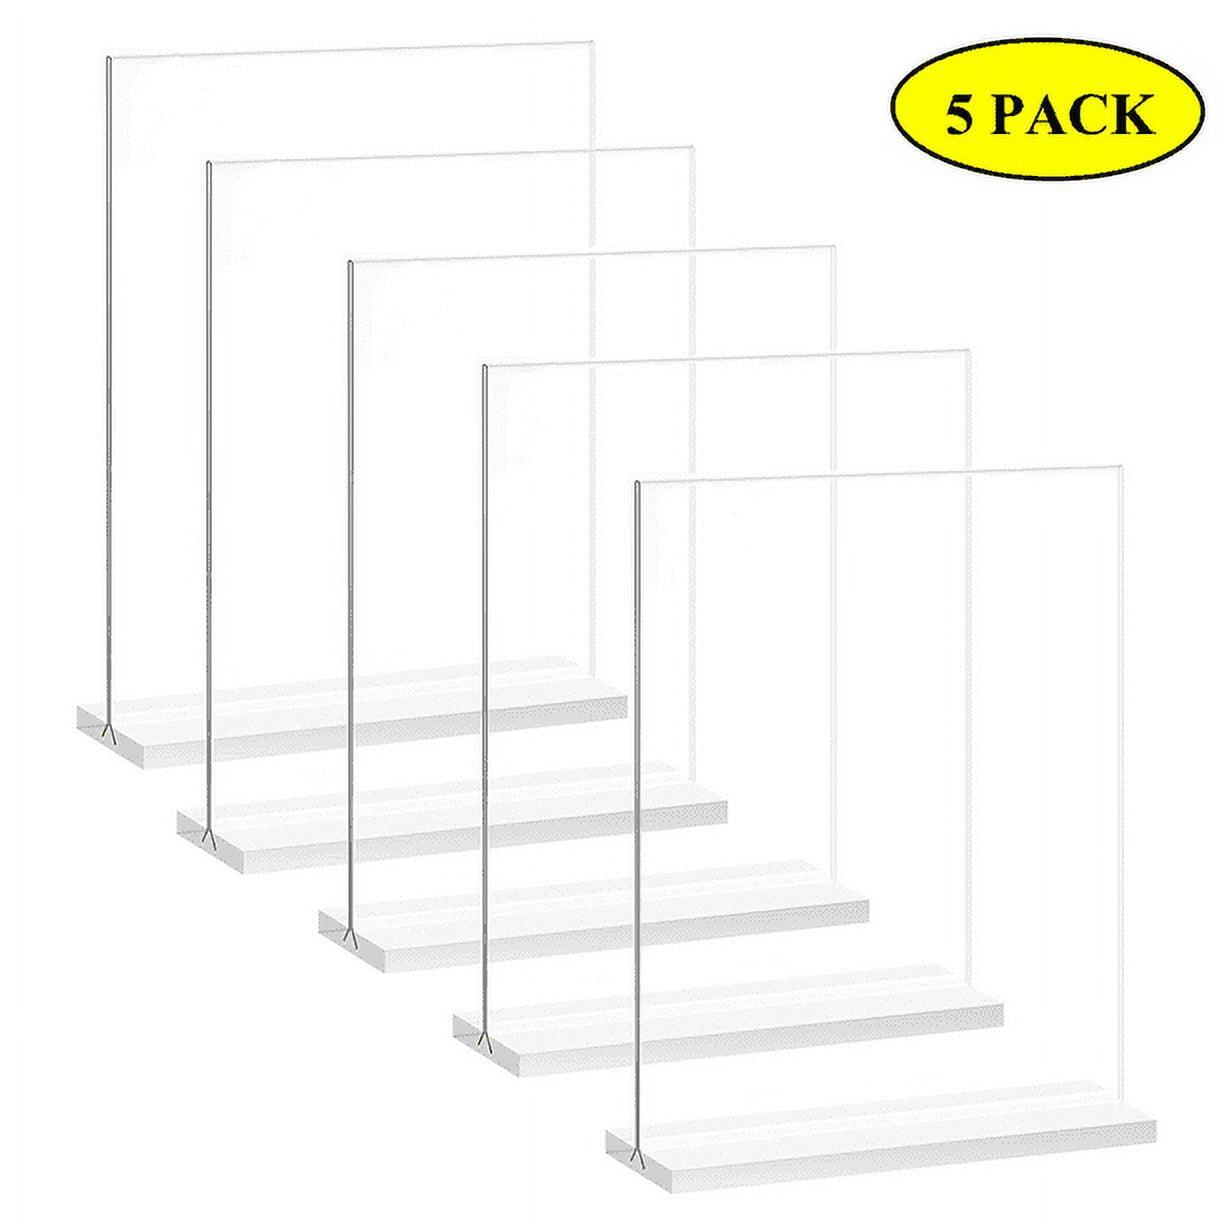 ALPINE INDUSTRIES 8.5″ X 11″ CLEAR ACRYLIC, T-SHAPED BASE, SIDE INSERT, TABLETOP  SIGN HOLDER – Alpine